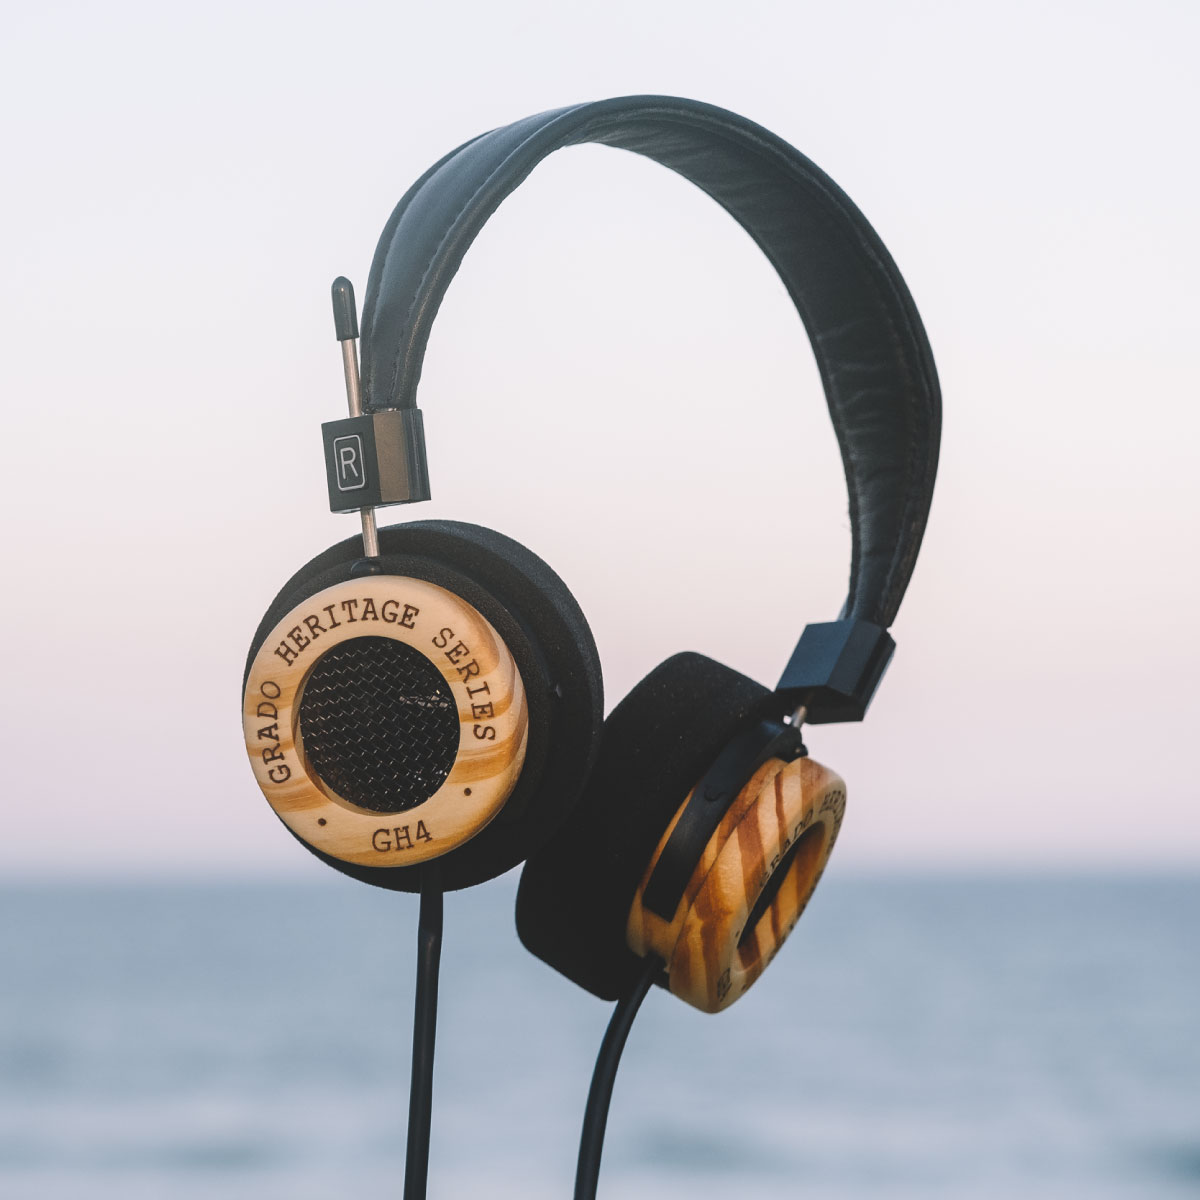 Photo of GH4 Headphones levitating in front of scene of the ocean and sky